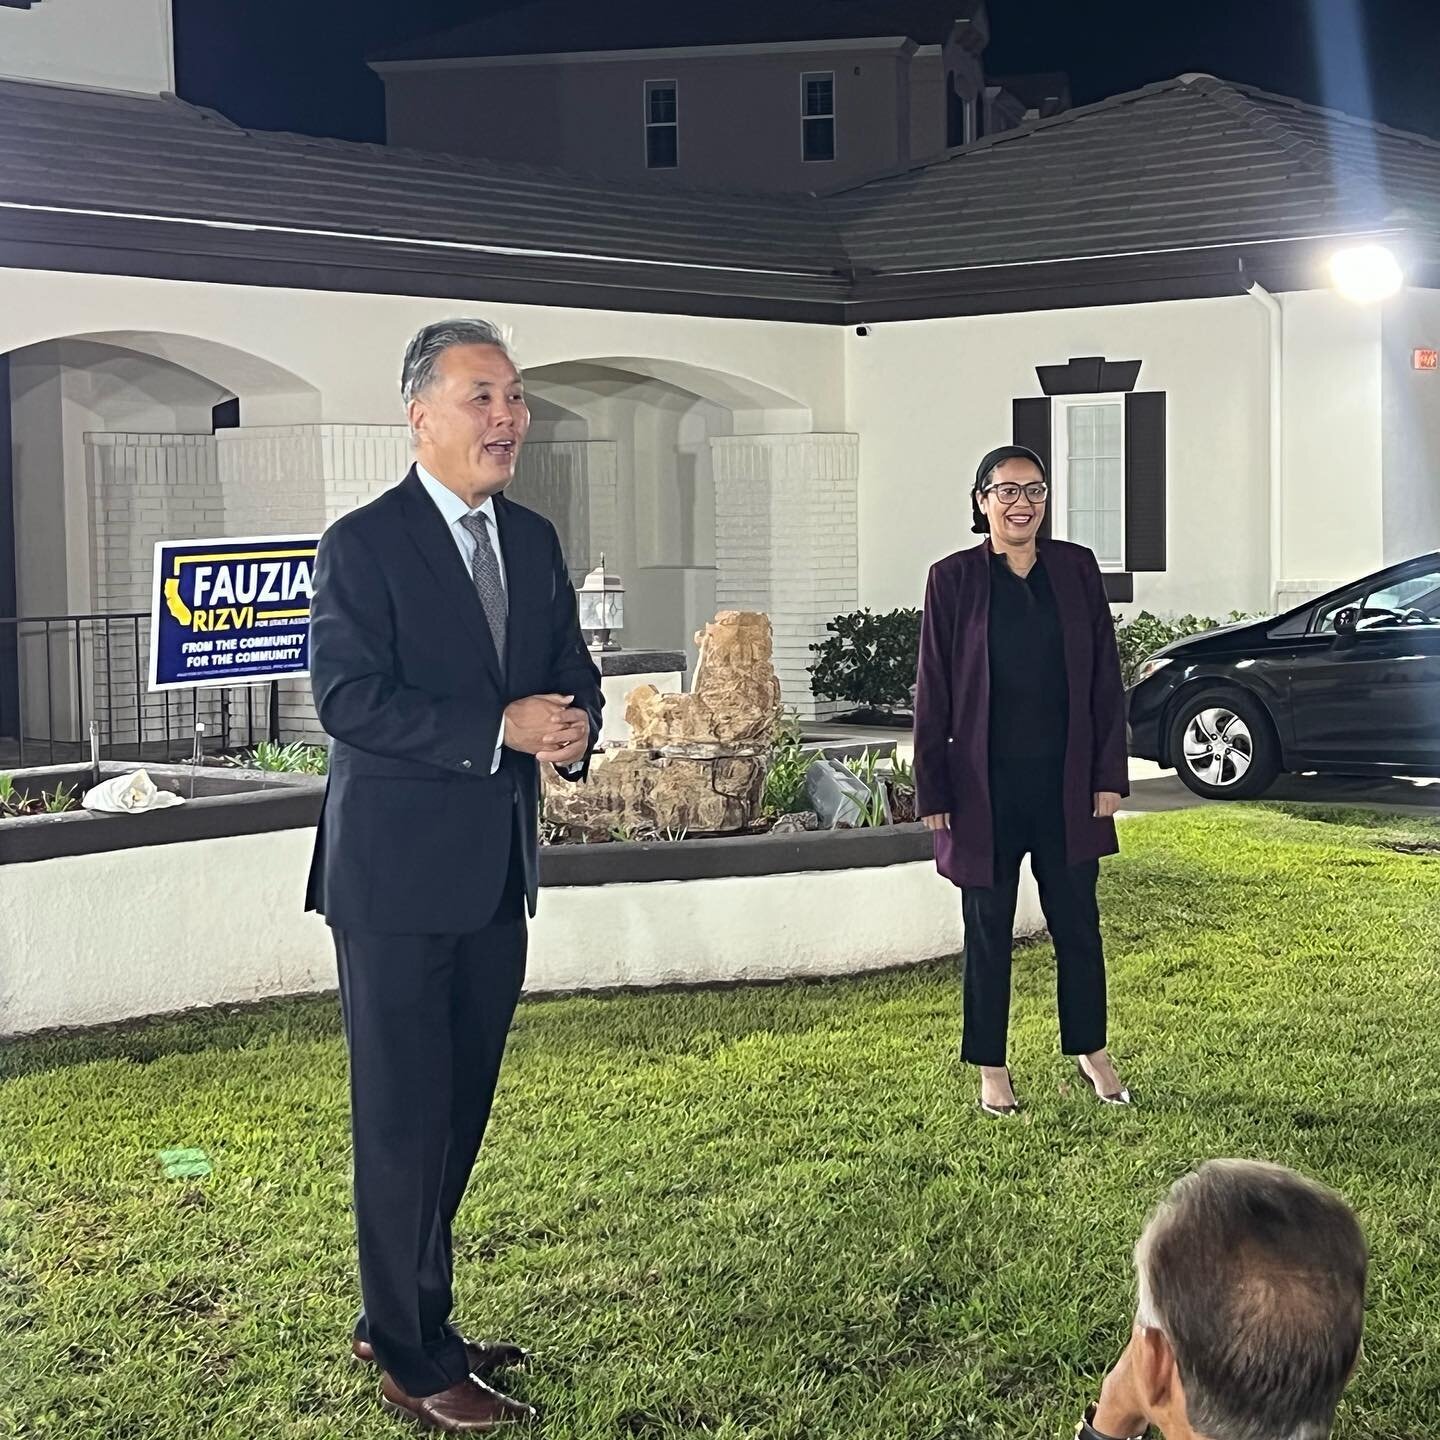 Tonight I stopped by an event for Fauzia Rizvi for Assemblymember. A longtime community member, I look forward to voting for my friend Fauzia this November!